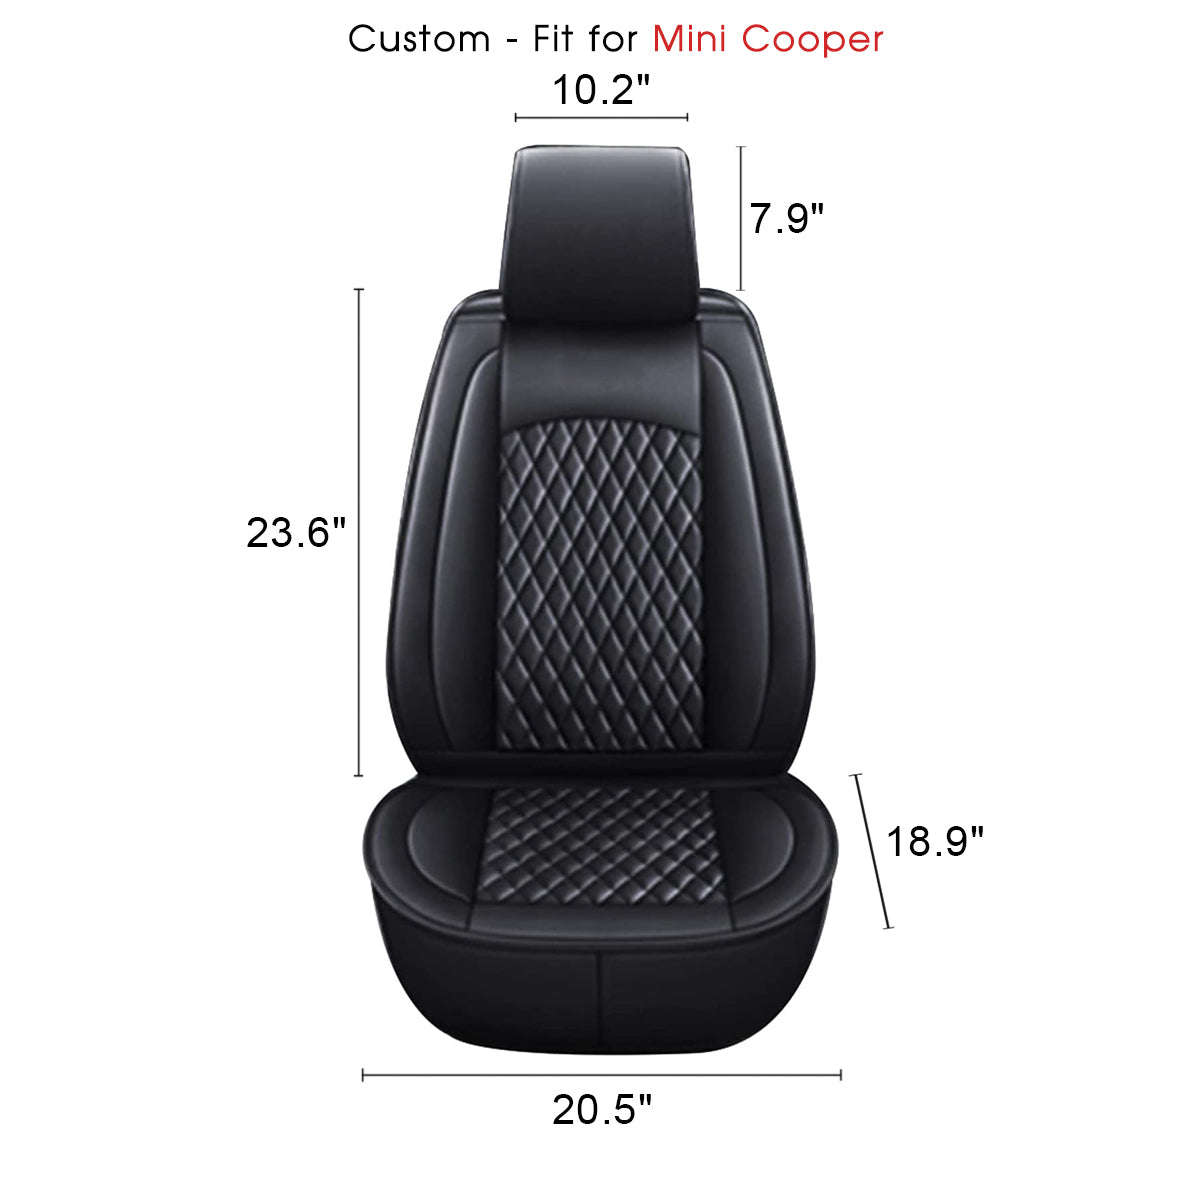 2 Car Seat Covers Full Set, Custom-Fit For Car, Waterproof Leather Front Rear Seat Automotive Protection Cushions, Car Accessories DLMT211